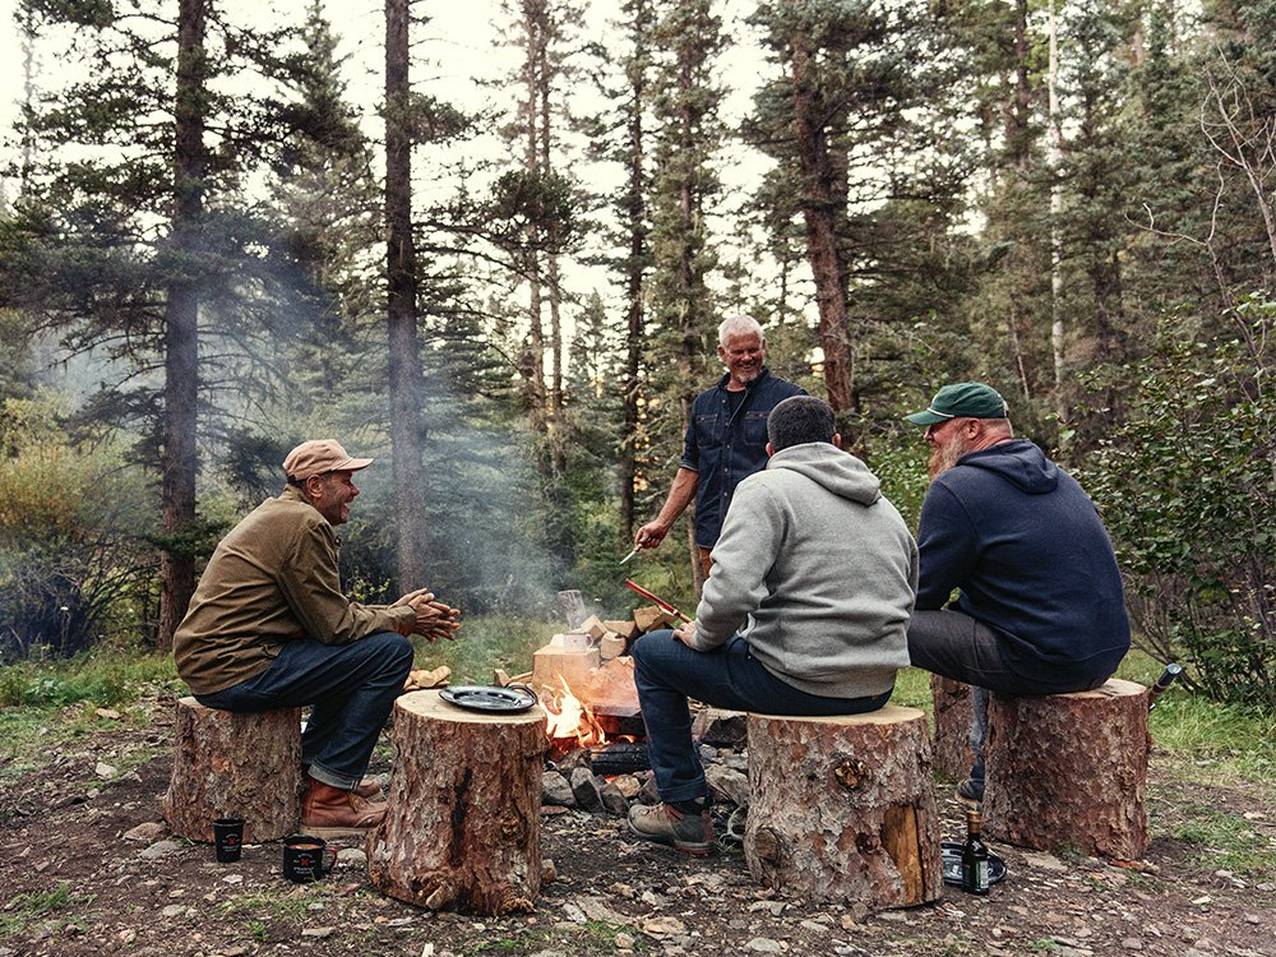 A group of man sit companionably around a campfire on wood logs.